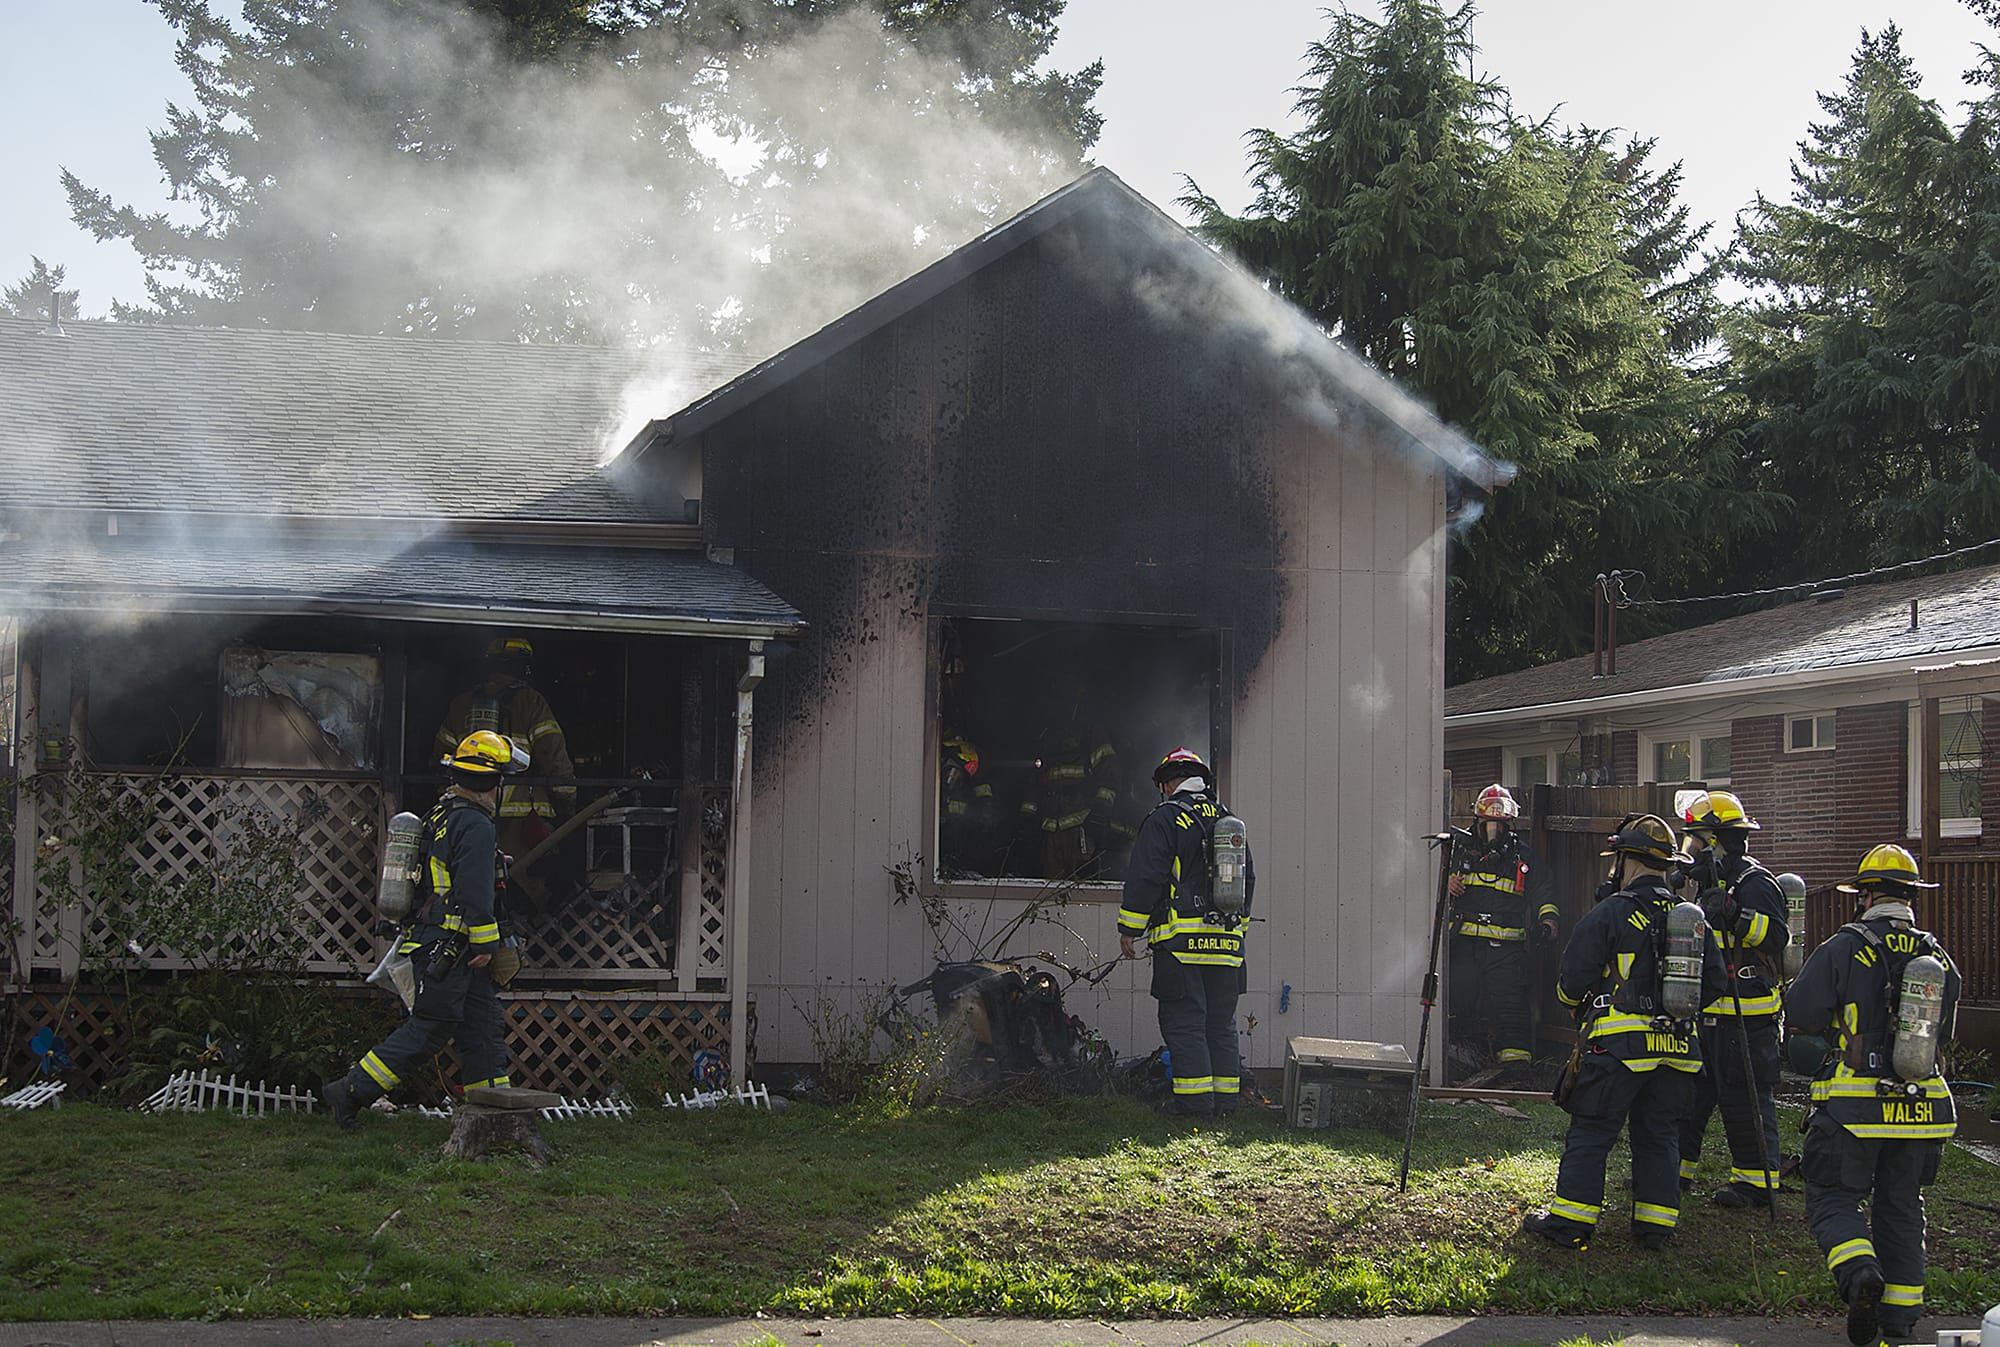 Vancouver firefighters work at the scene of a house fire at 1105 East 29th Street on Friday afternoon, Nov. 2, 2018. One woman was reportedly severely injured in the blaze.